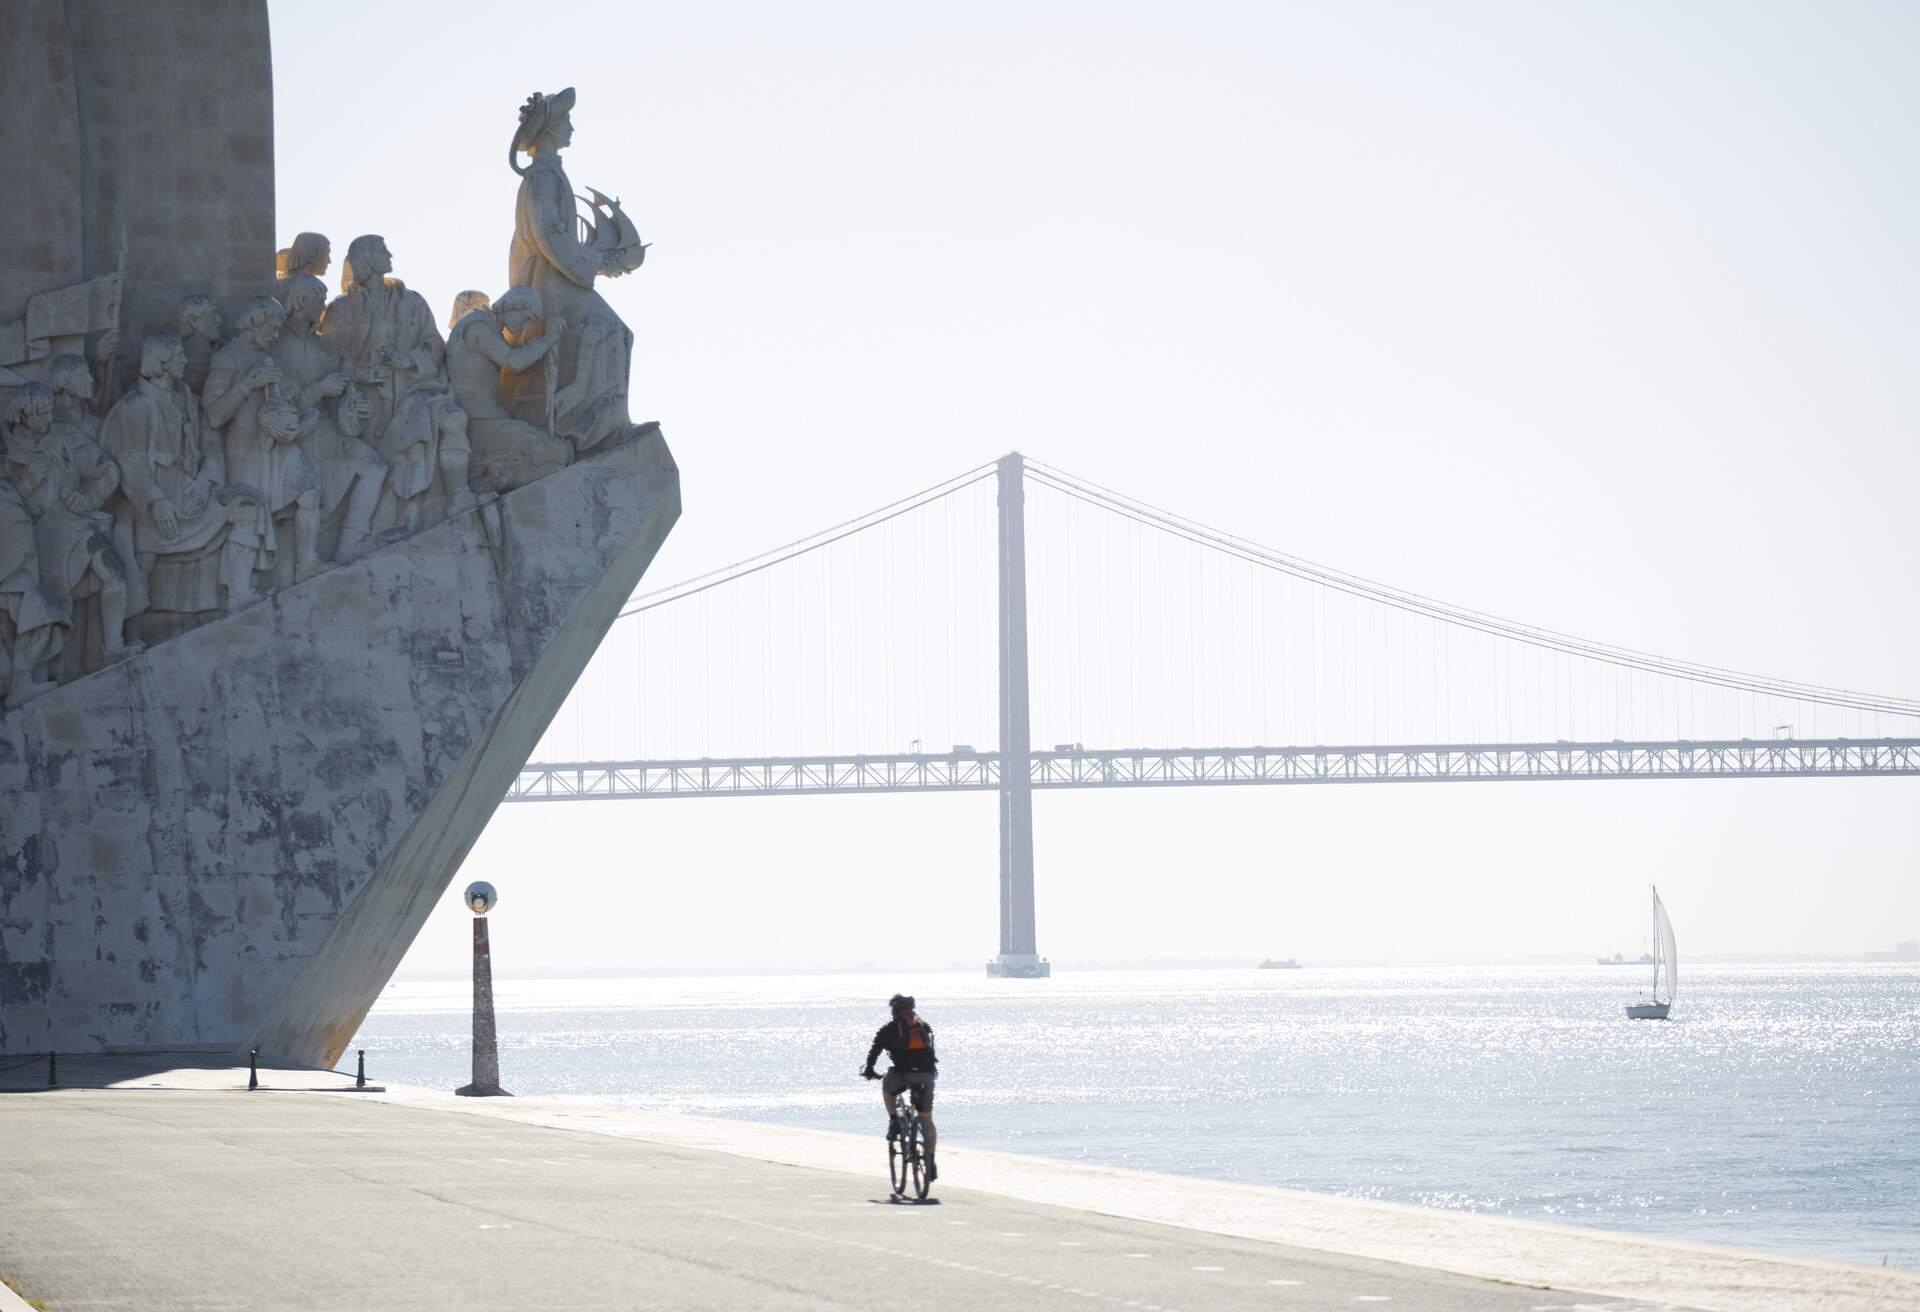 A cyclist approaches a riverside monument with statues of people going up a slope against a backdrop of a suspension bridge.